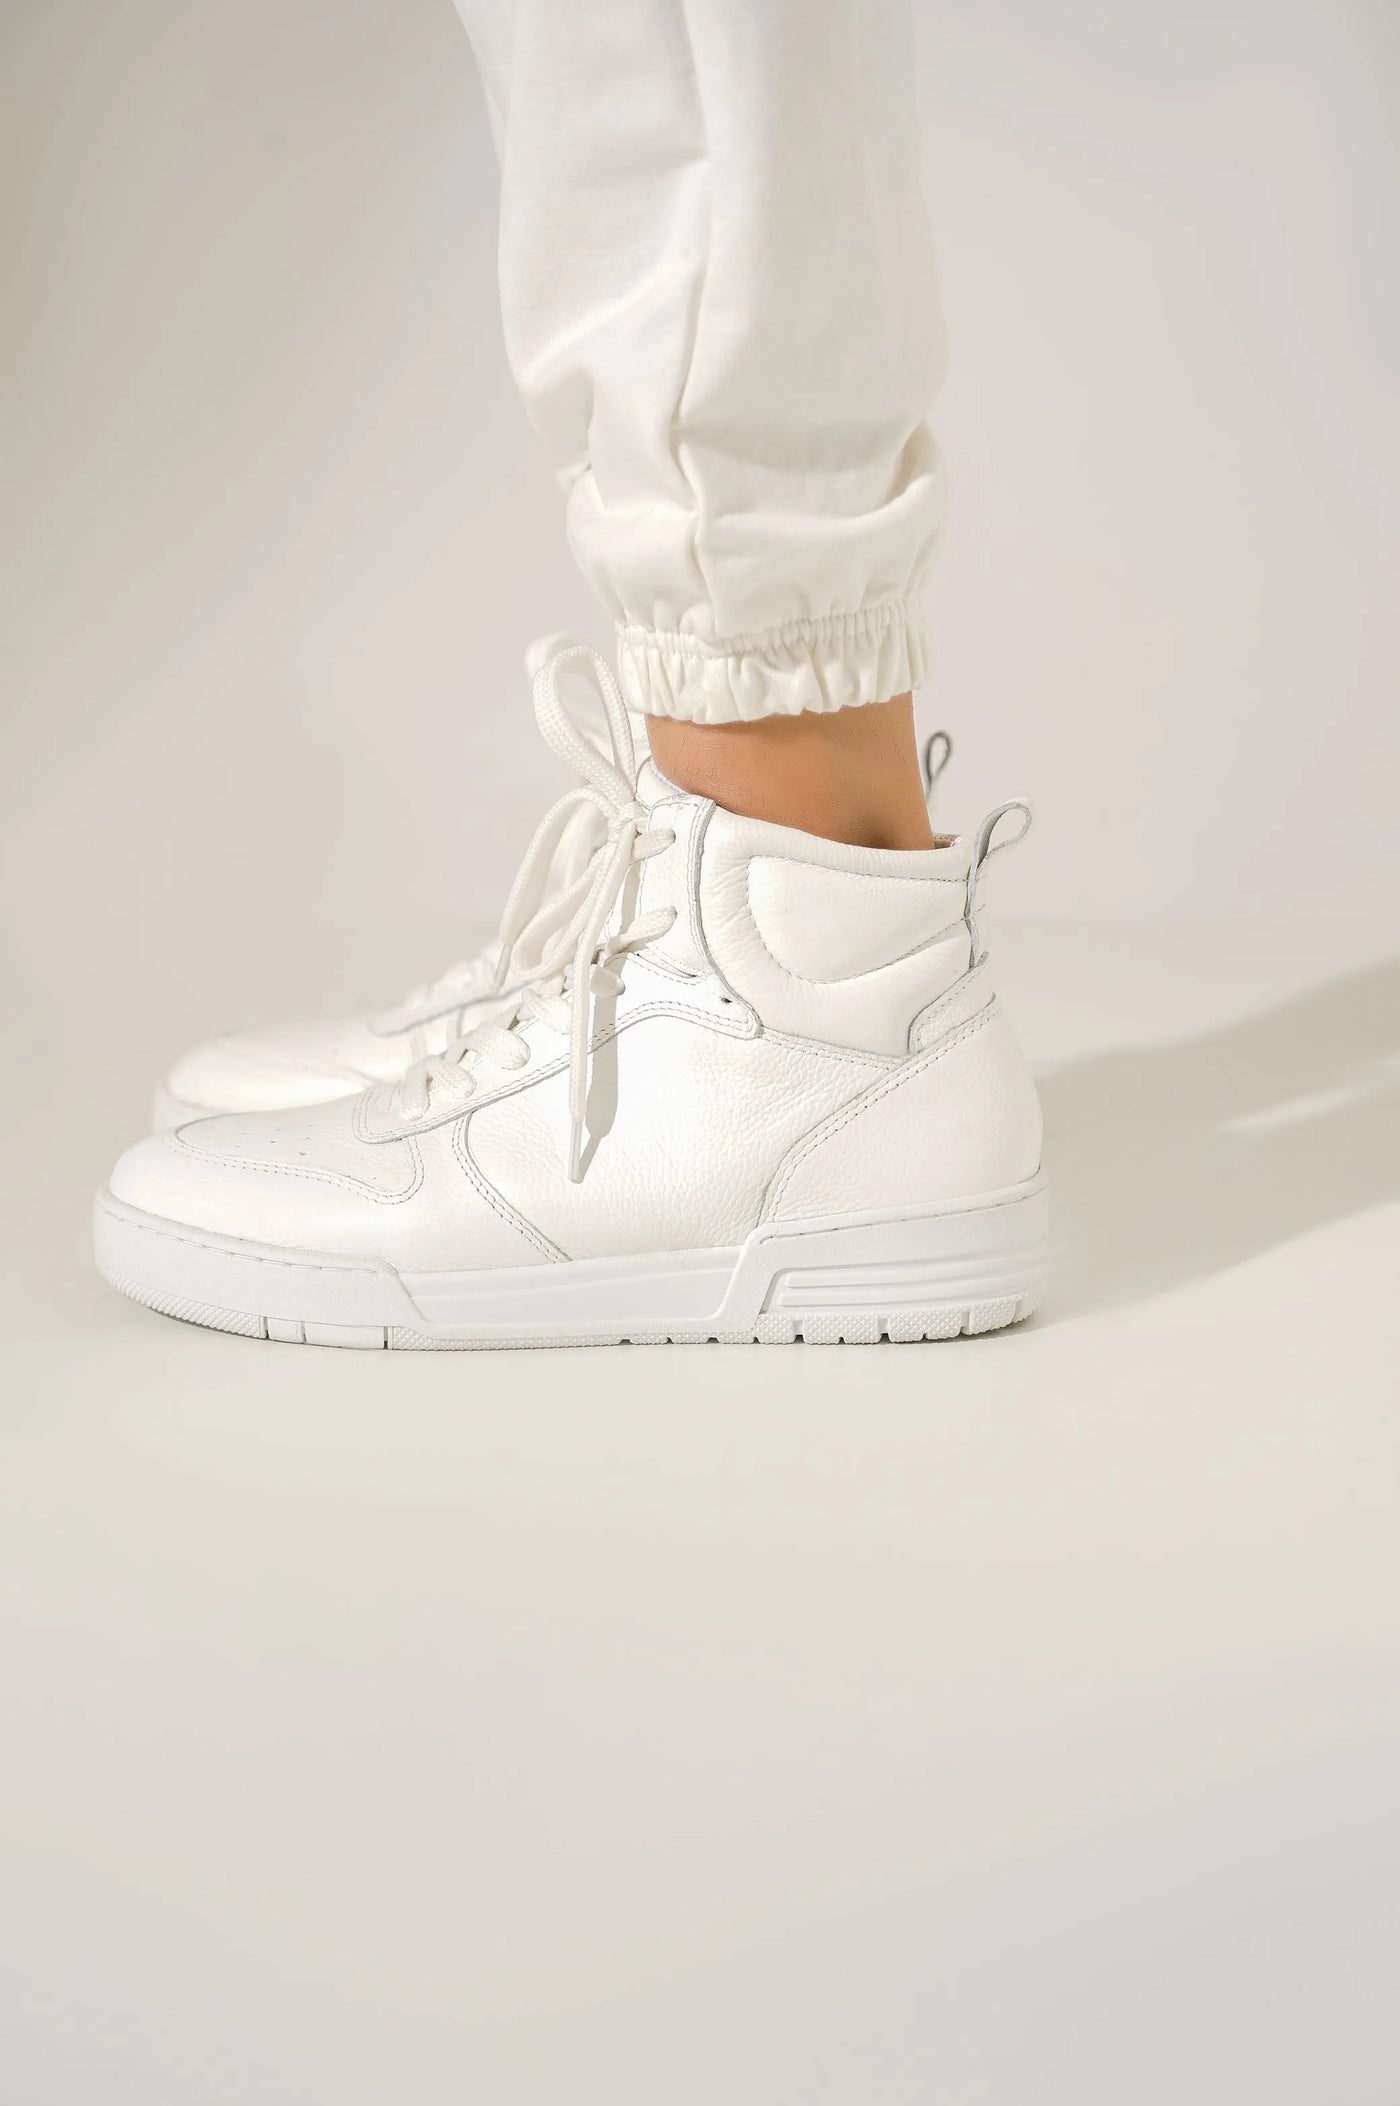 CLASSIC HIGH TOP SNEAKERS - WOMEN LACE-UPS